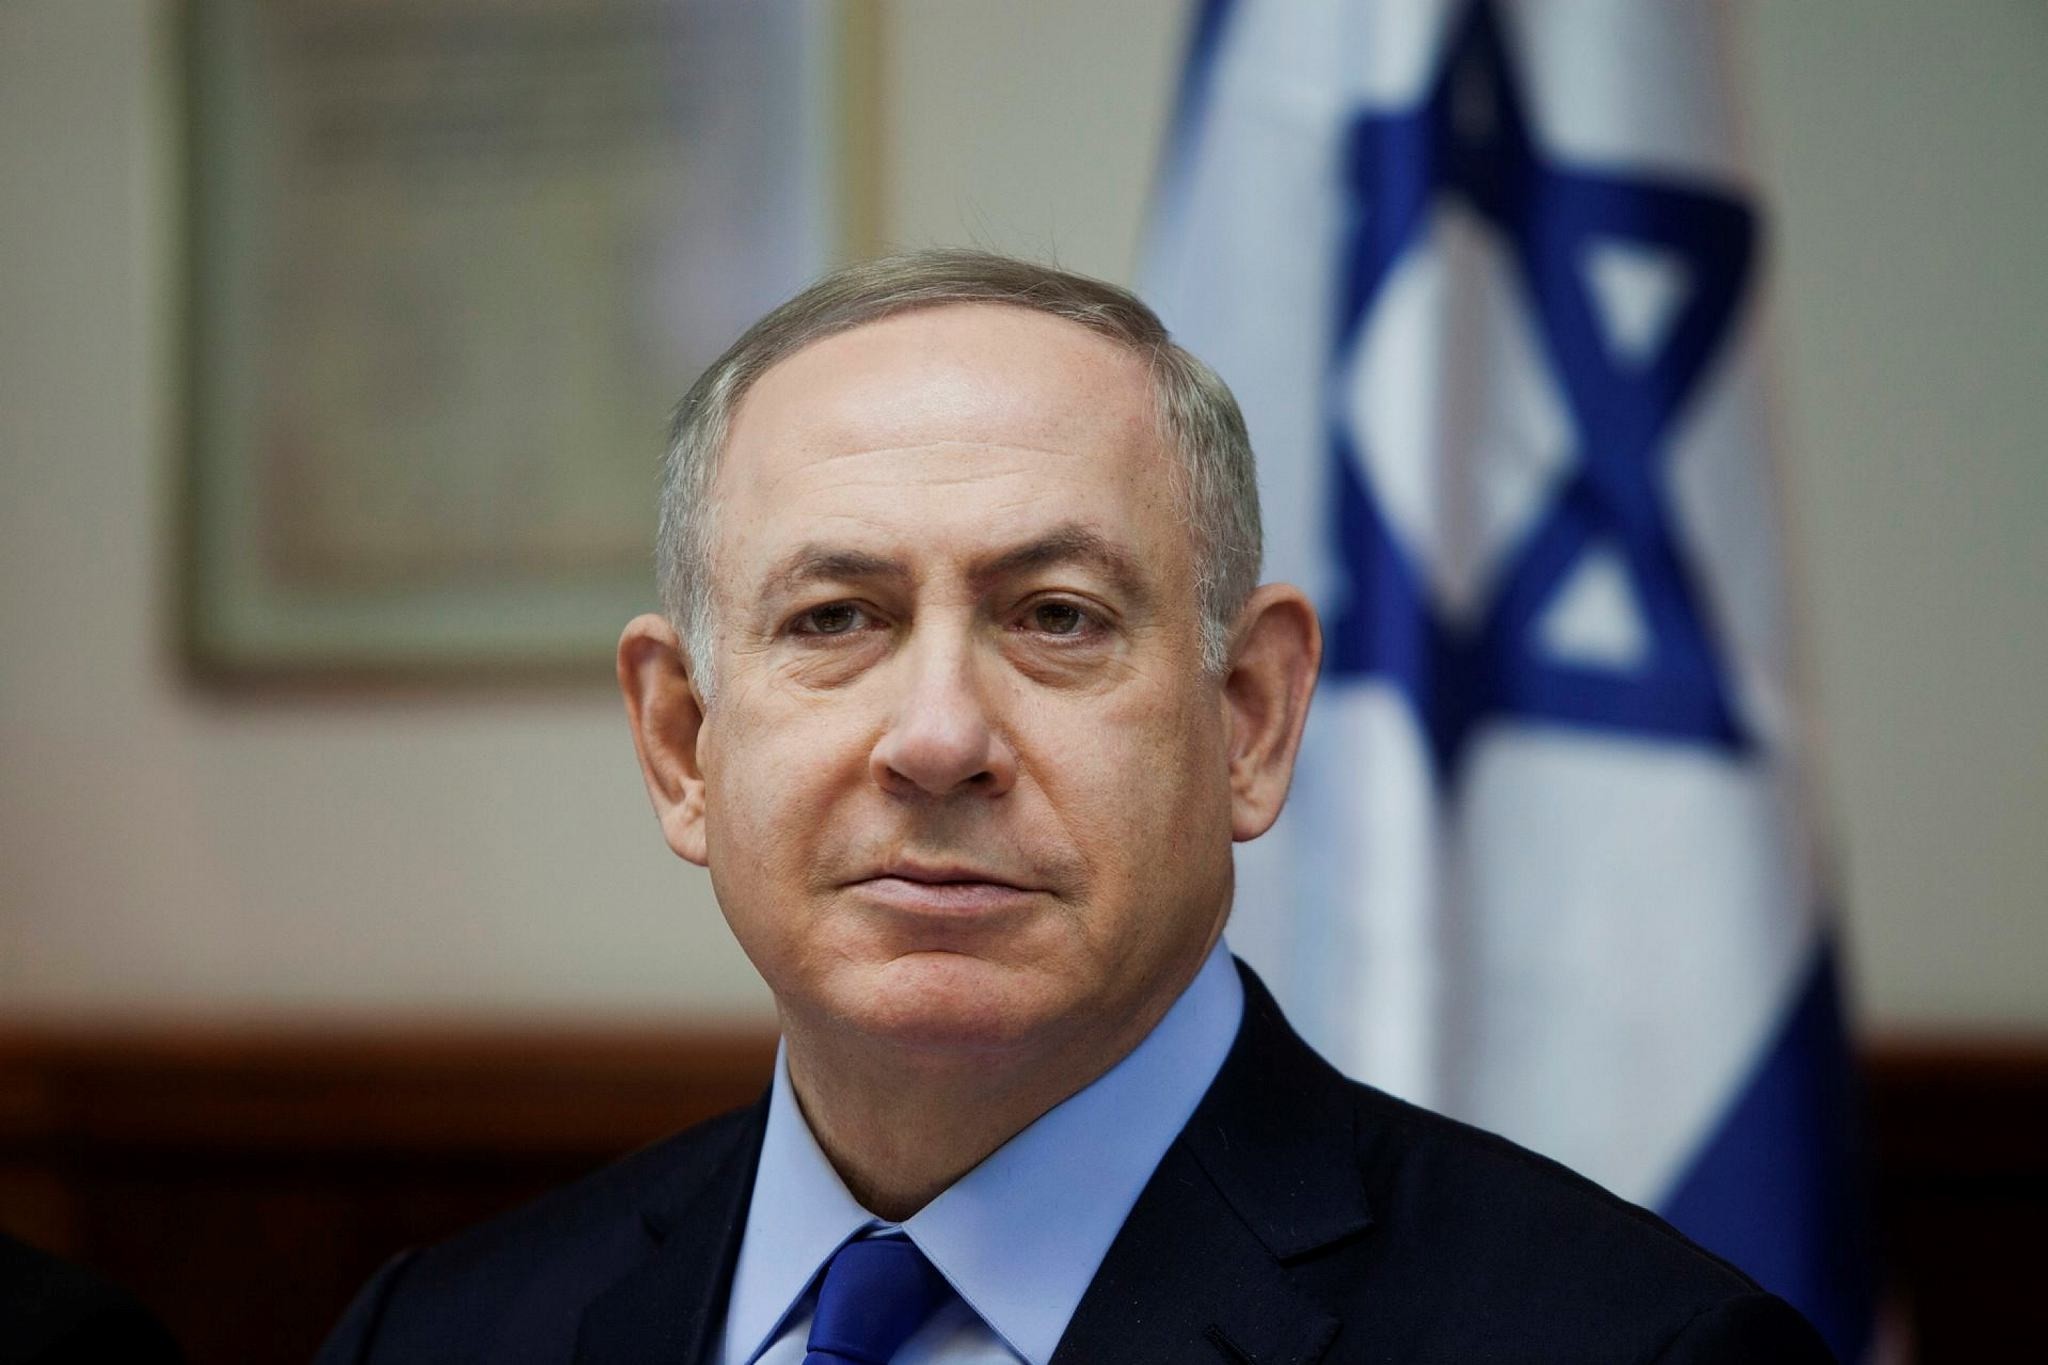 Israeli Prime Minister Benjamin Netanyahu called for a pardon for a soldier convicted of manslaughter in the fatal shooting of a badly wounded Palestinian assailant.